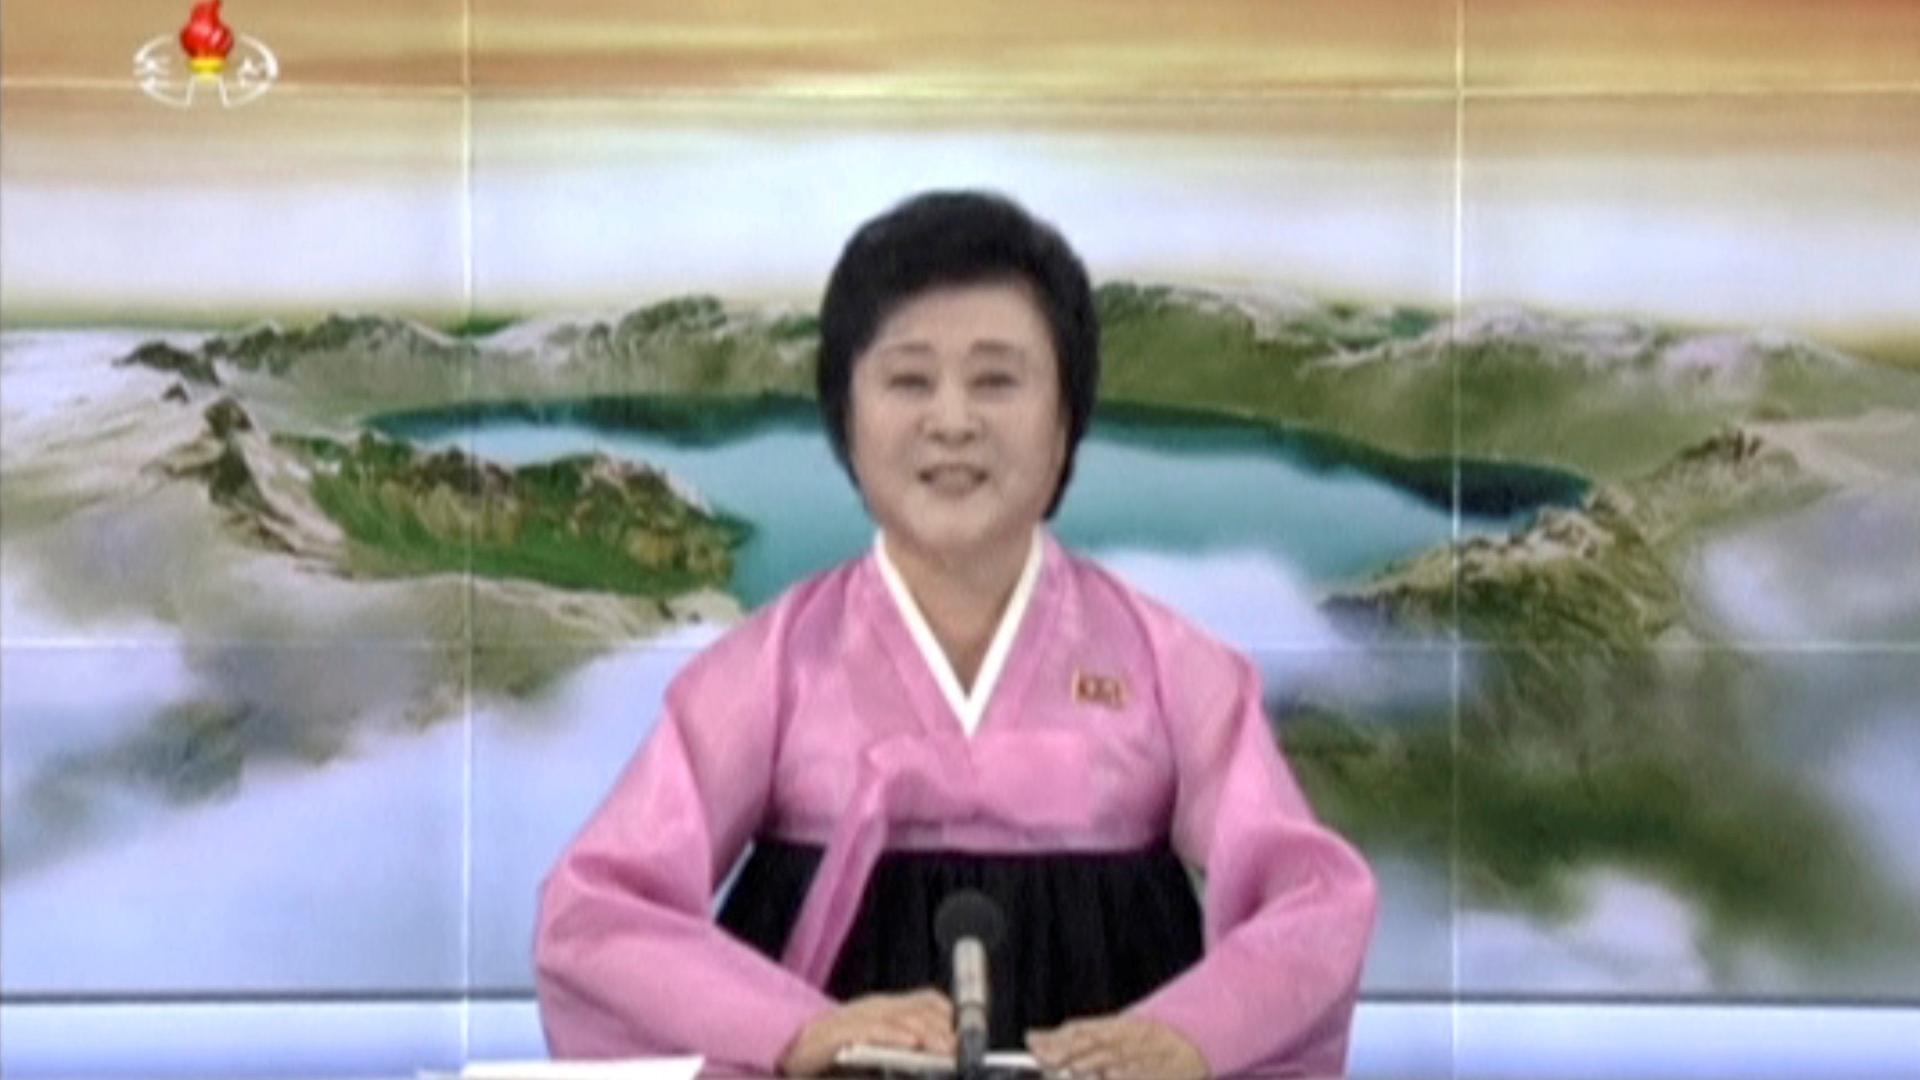 Ri Chun Hee, the “Pink Lady,” making an important announcement on North Korean television